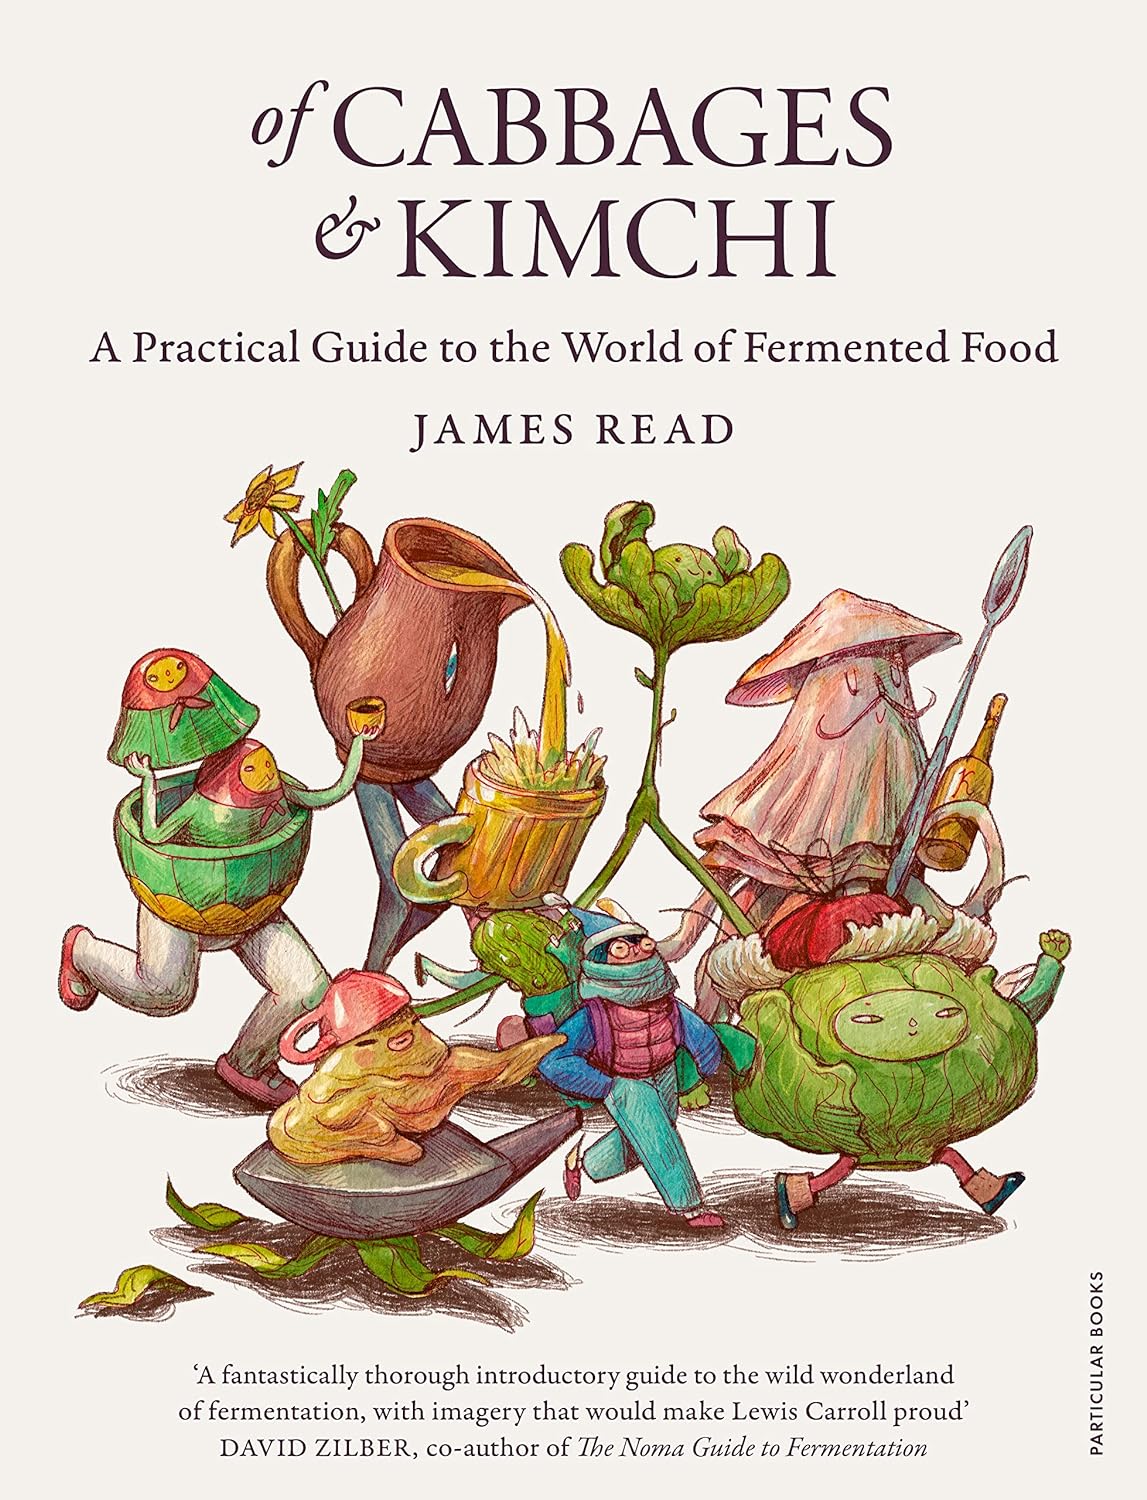 Of Cabbages and Kimchi: A Practical Guide to the World of Fermented Food